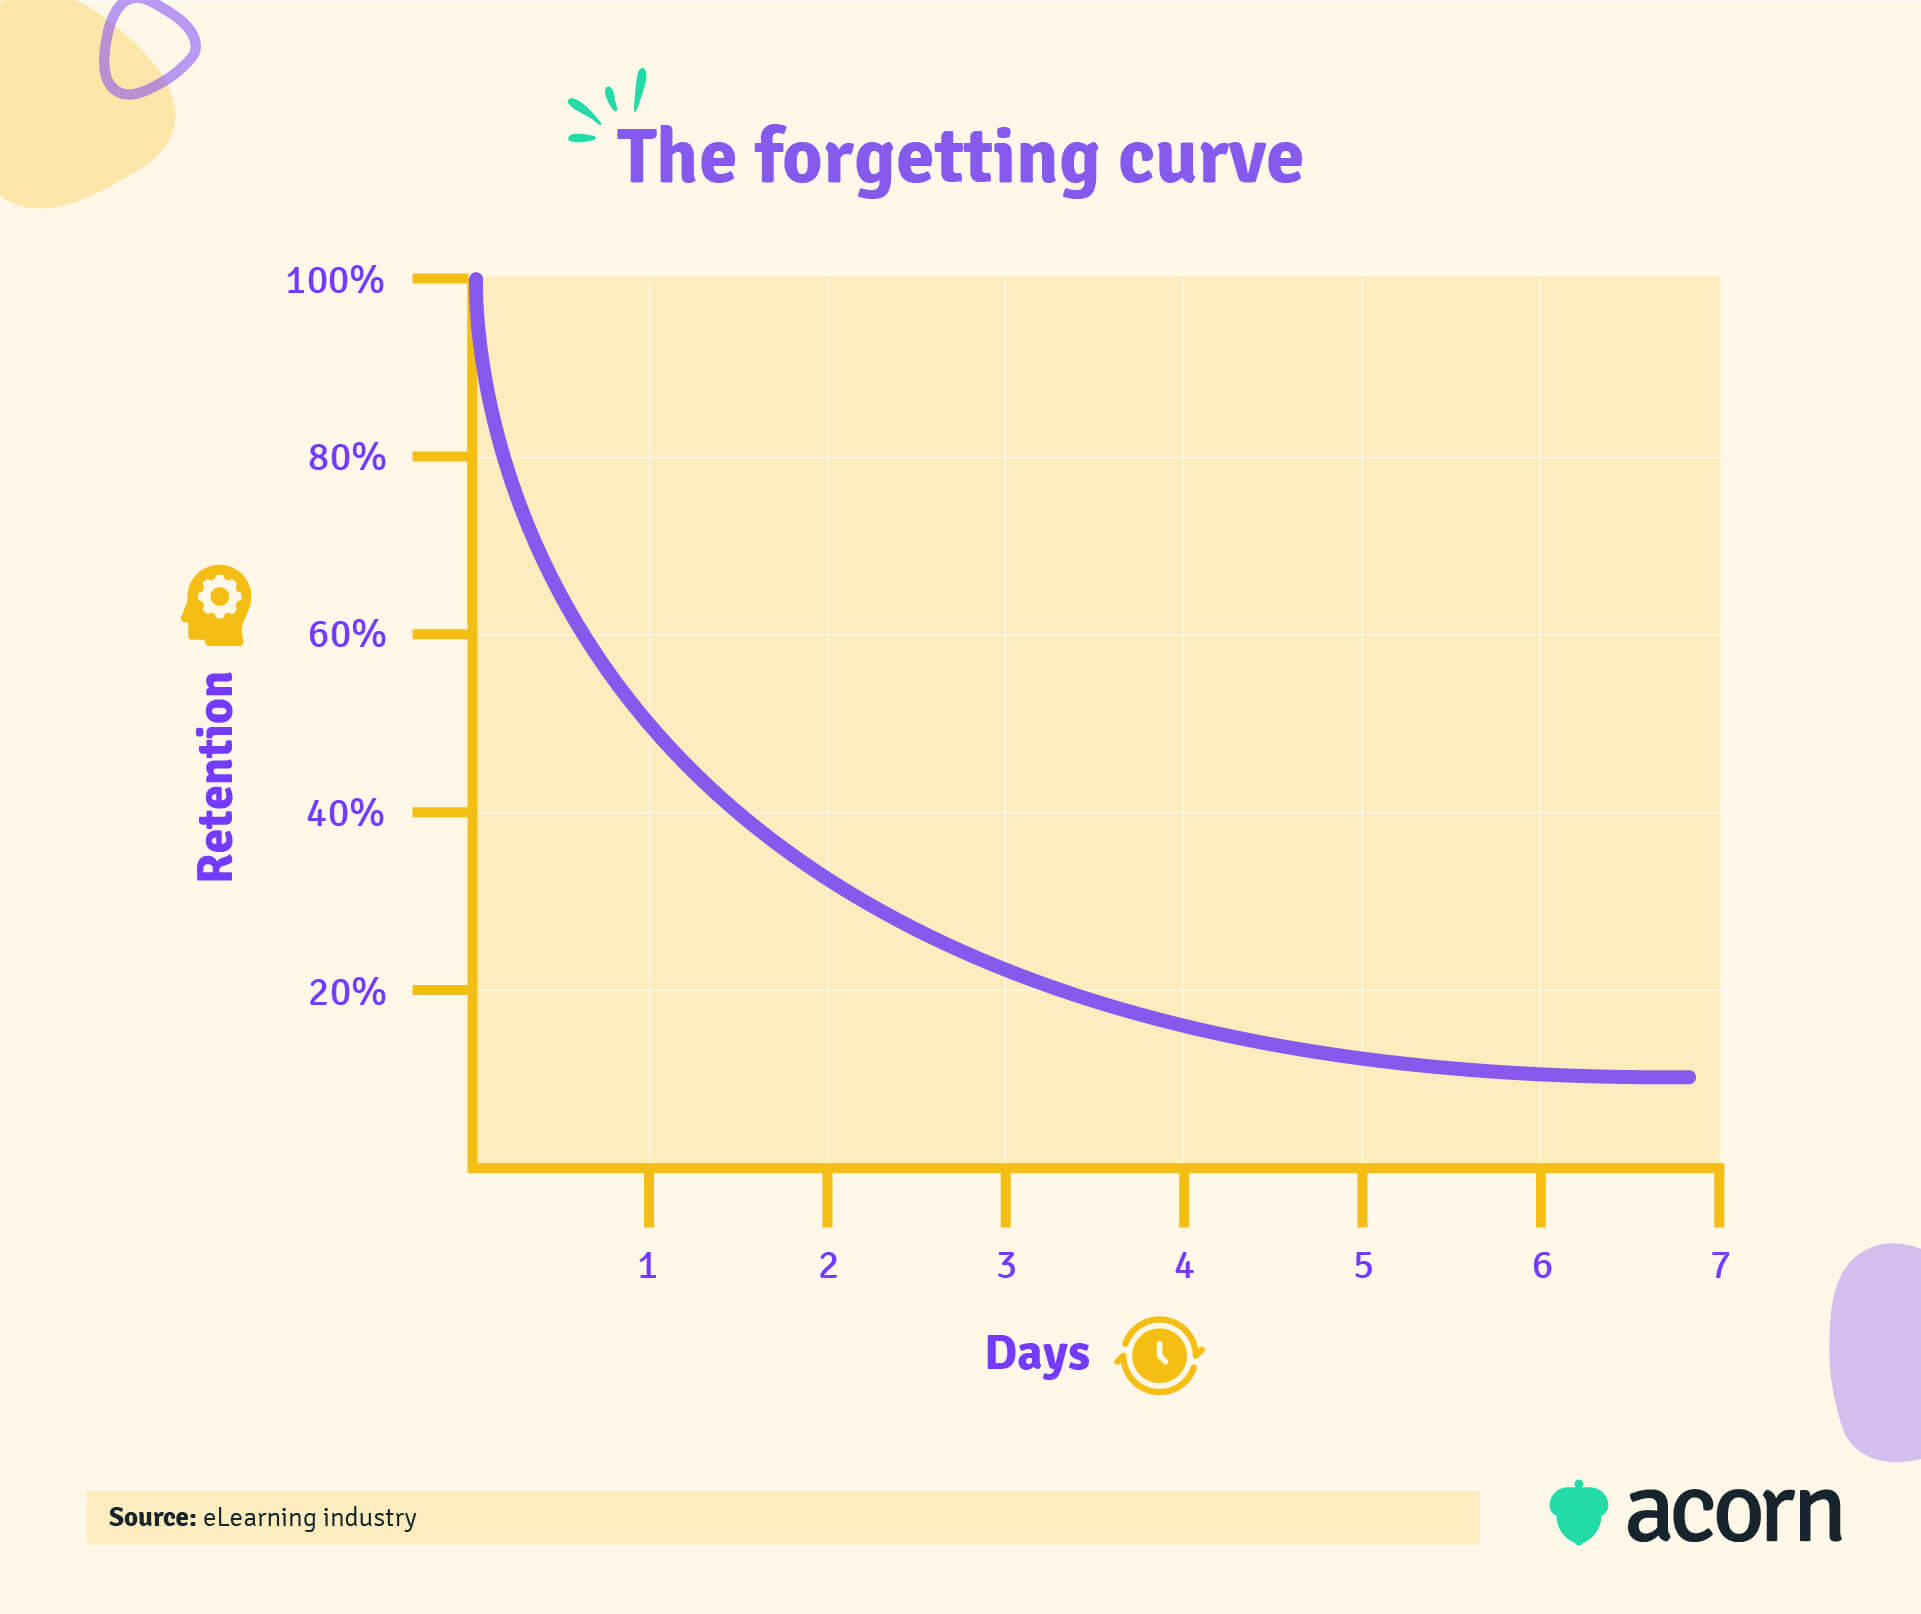 Line graph visualising the "forgetting curve" of knowledge lost.